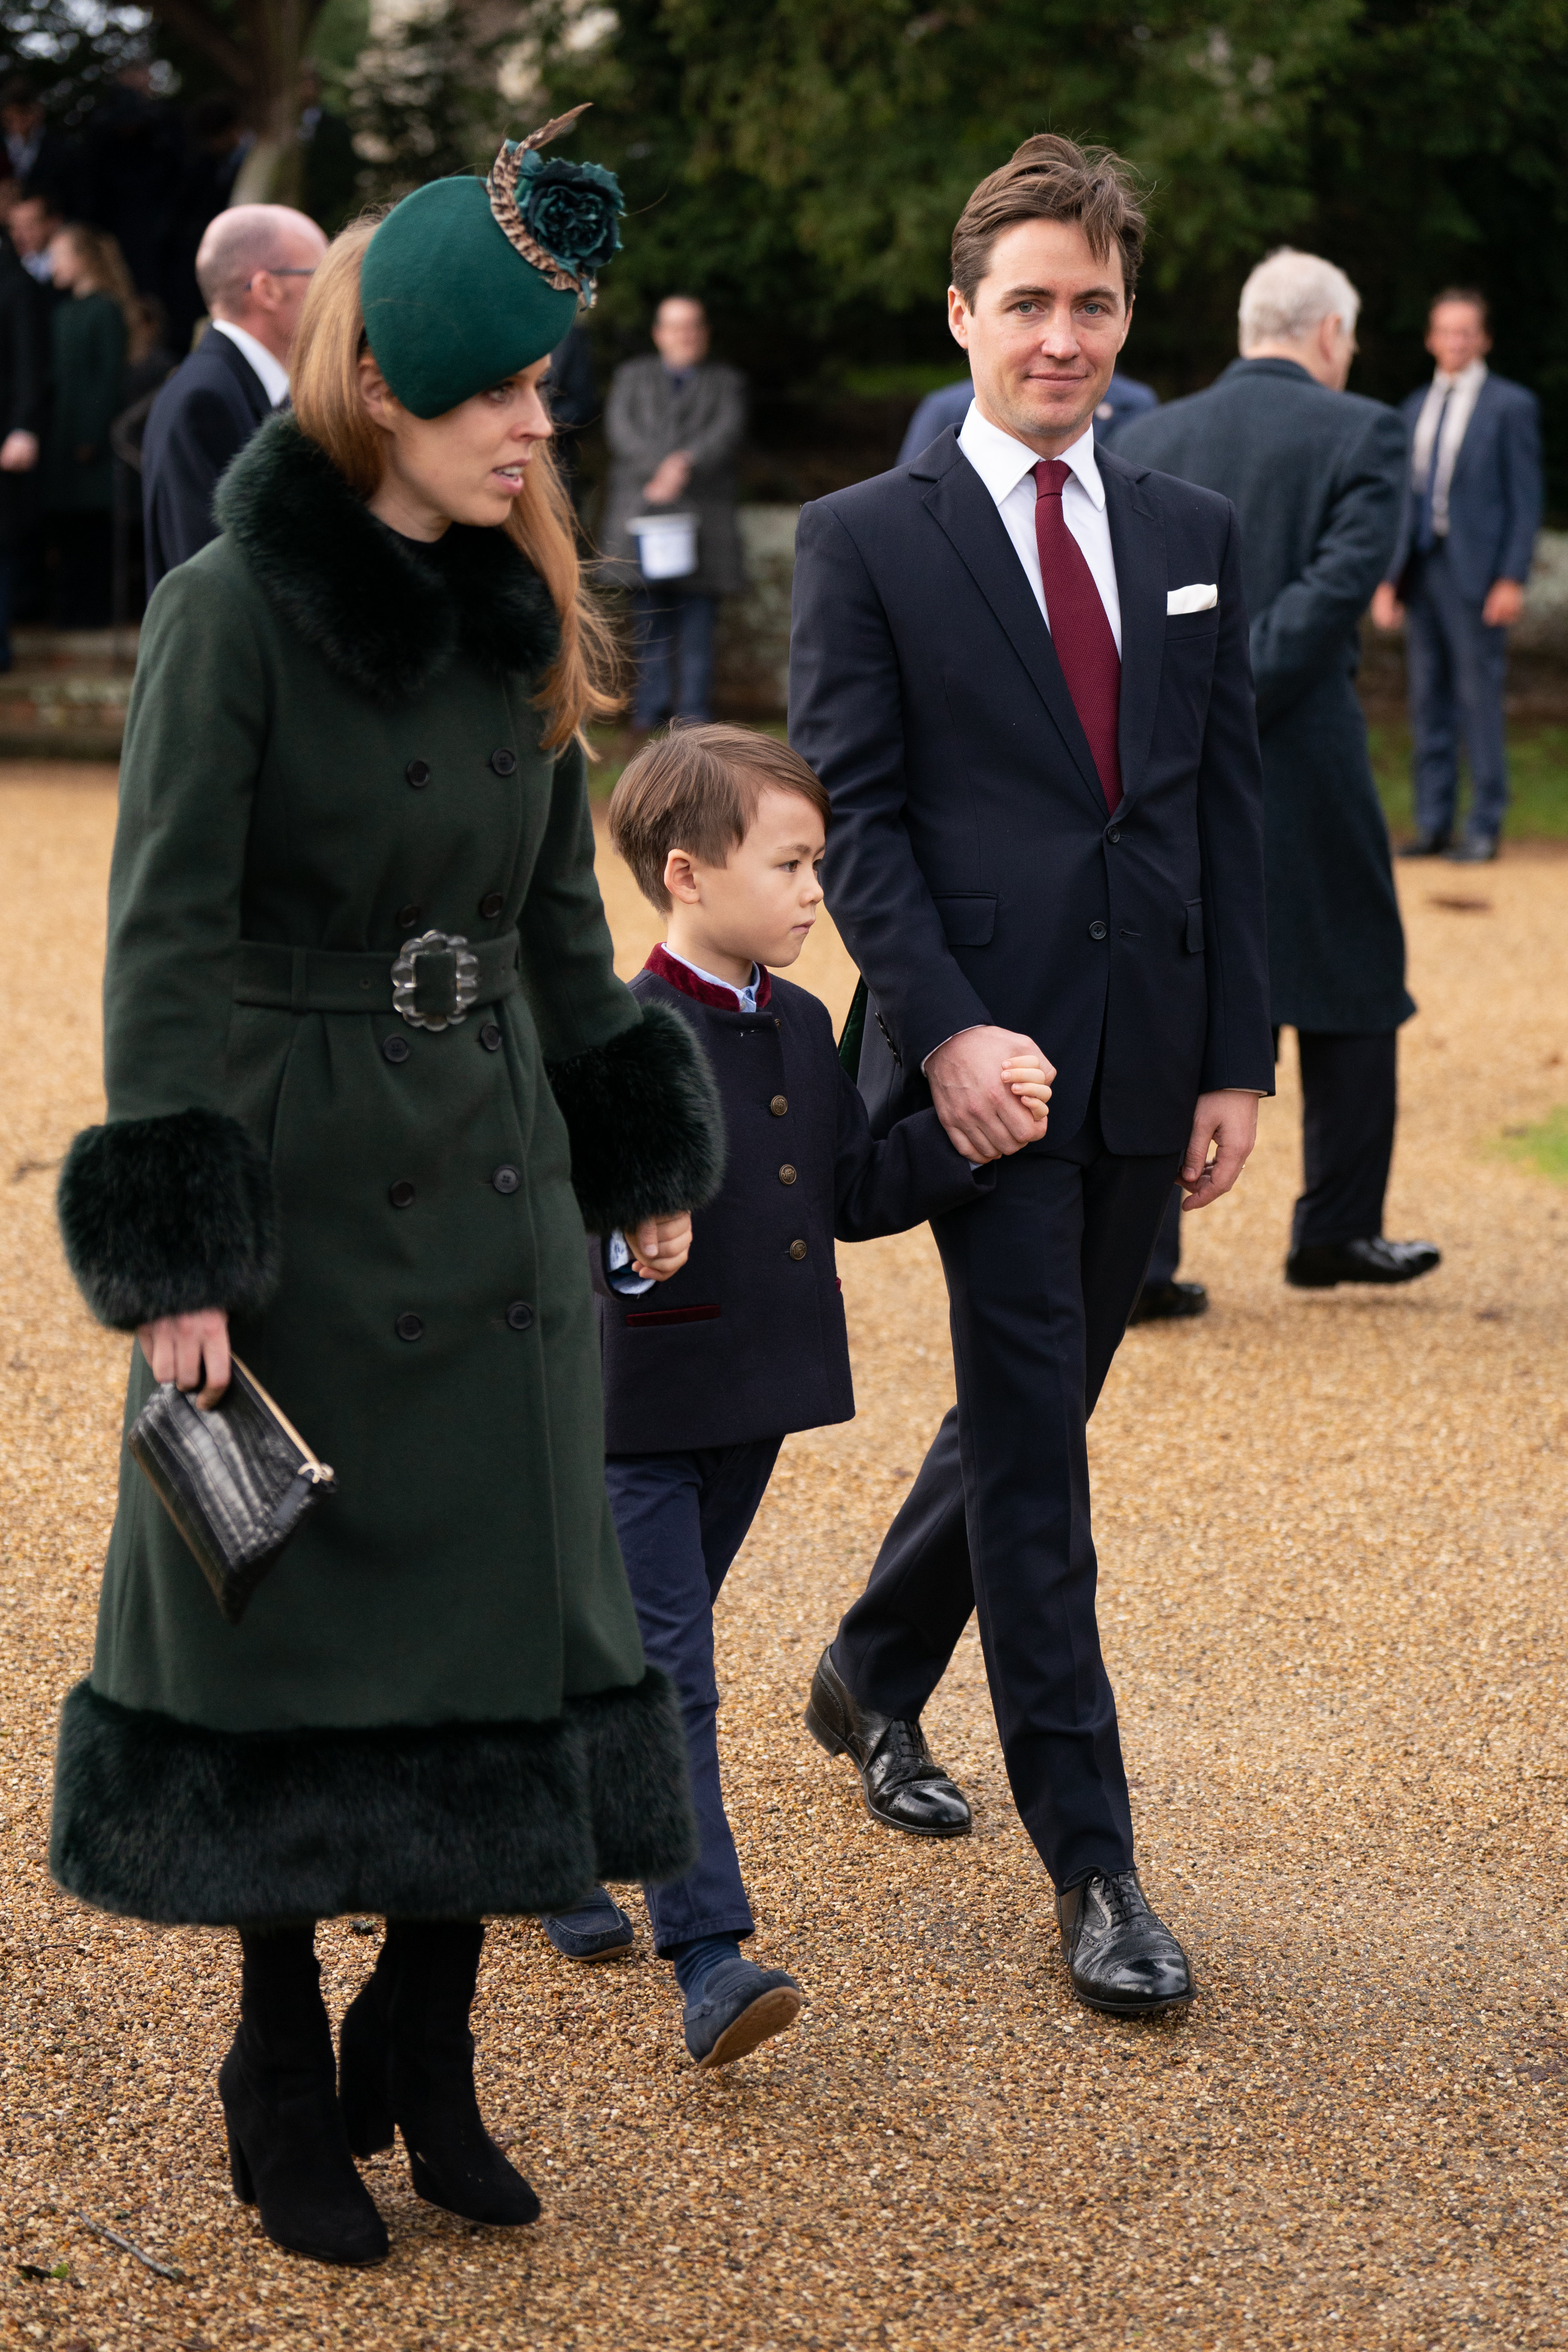 Princess Beatrice, Christopher Woolf Mapelli Mozzi, and Edoardo Mapelli Mozzi go to the Christmas Day church service at St Mary Magdalene Church on December 25, 2022, in Sandringham, Norfolk. | Source: Getty Images